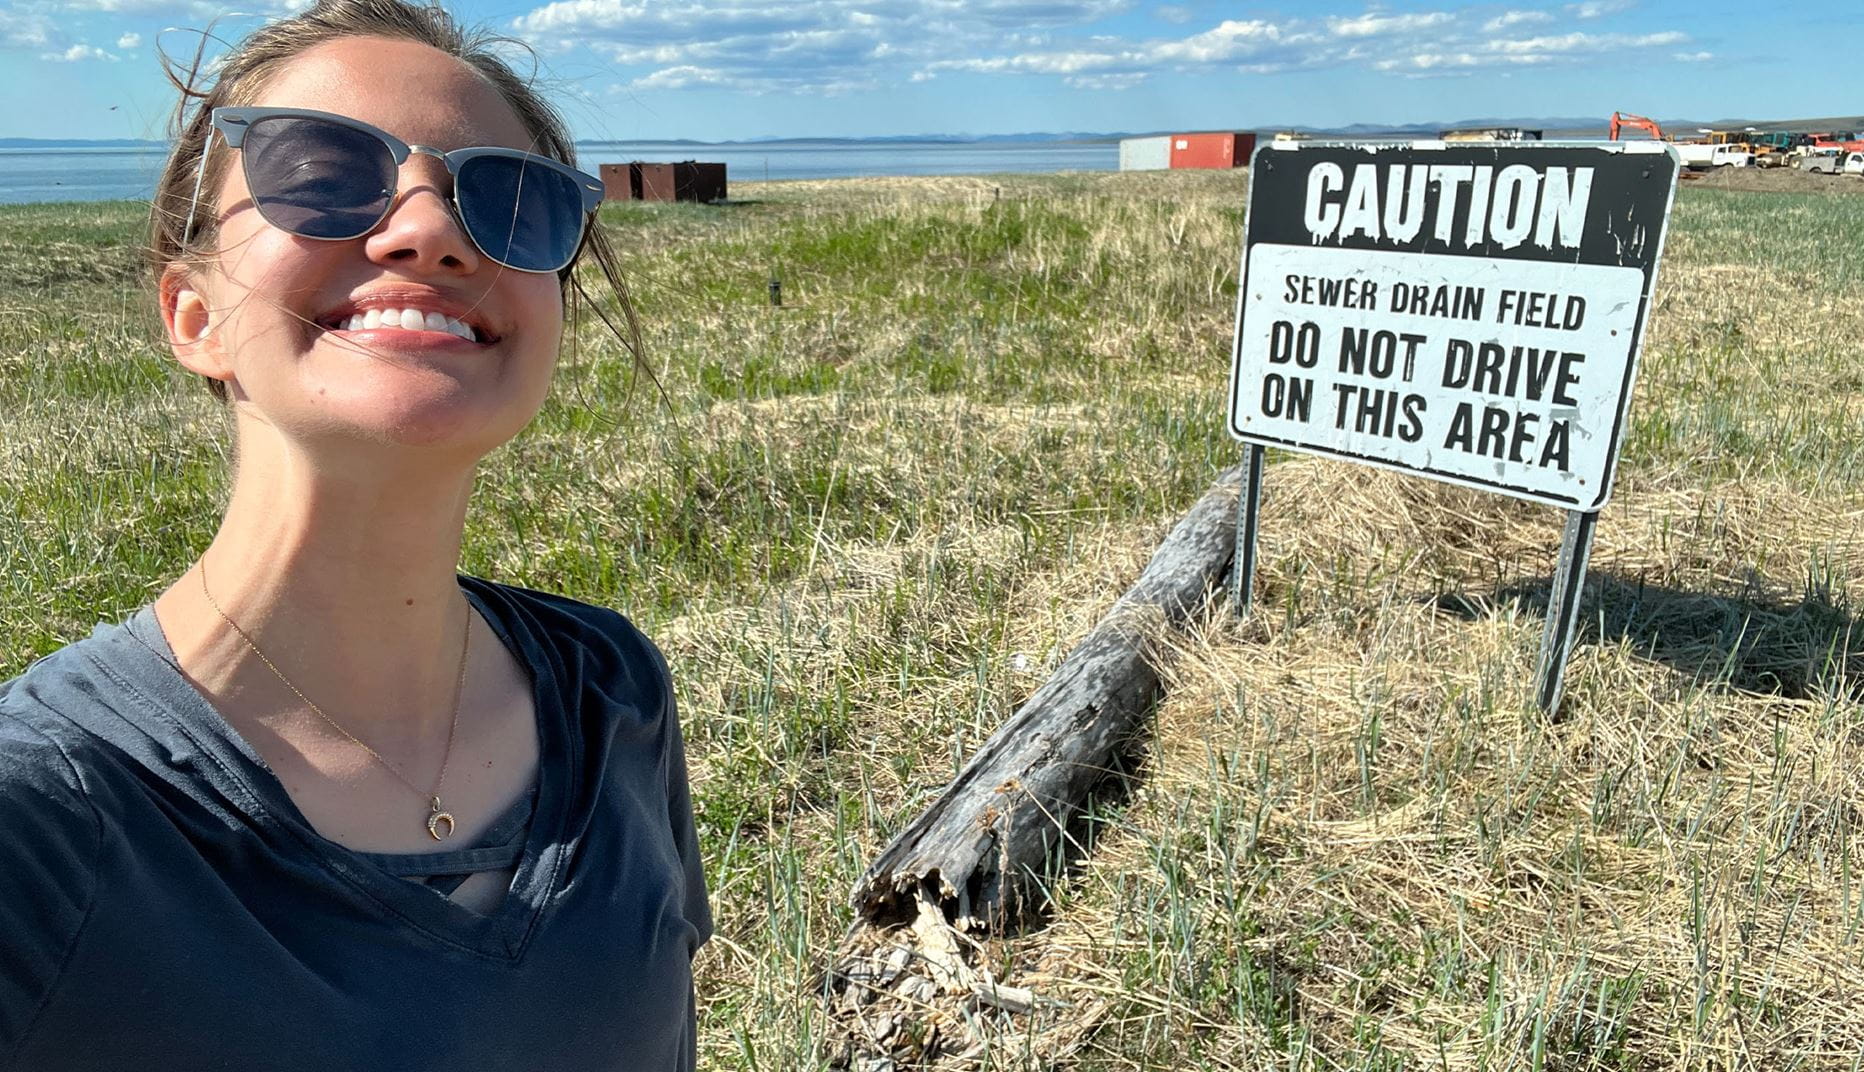 Theresa in front of caution sign